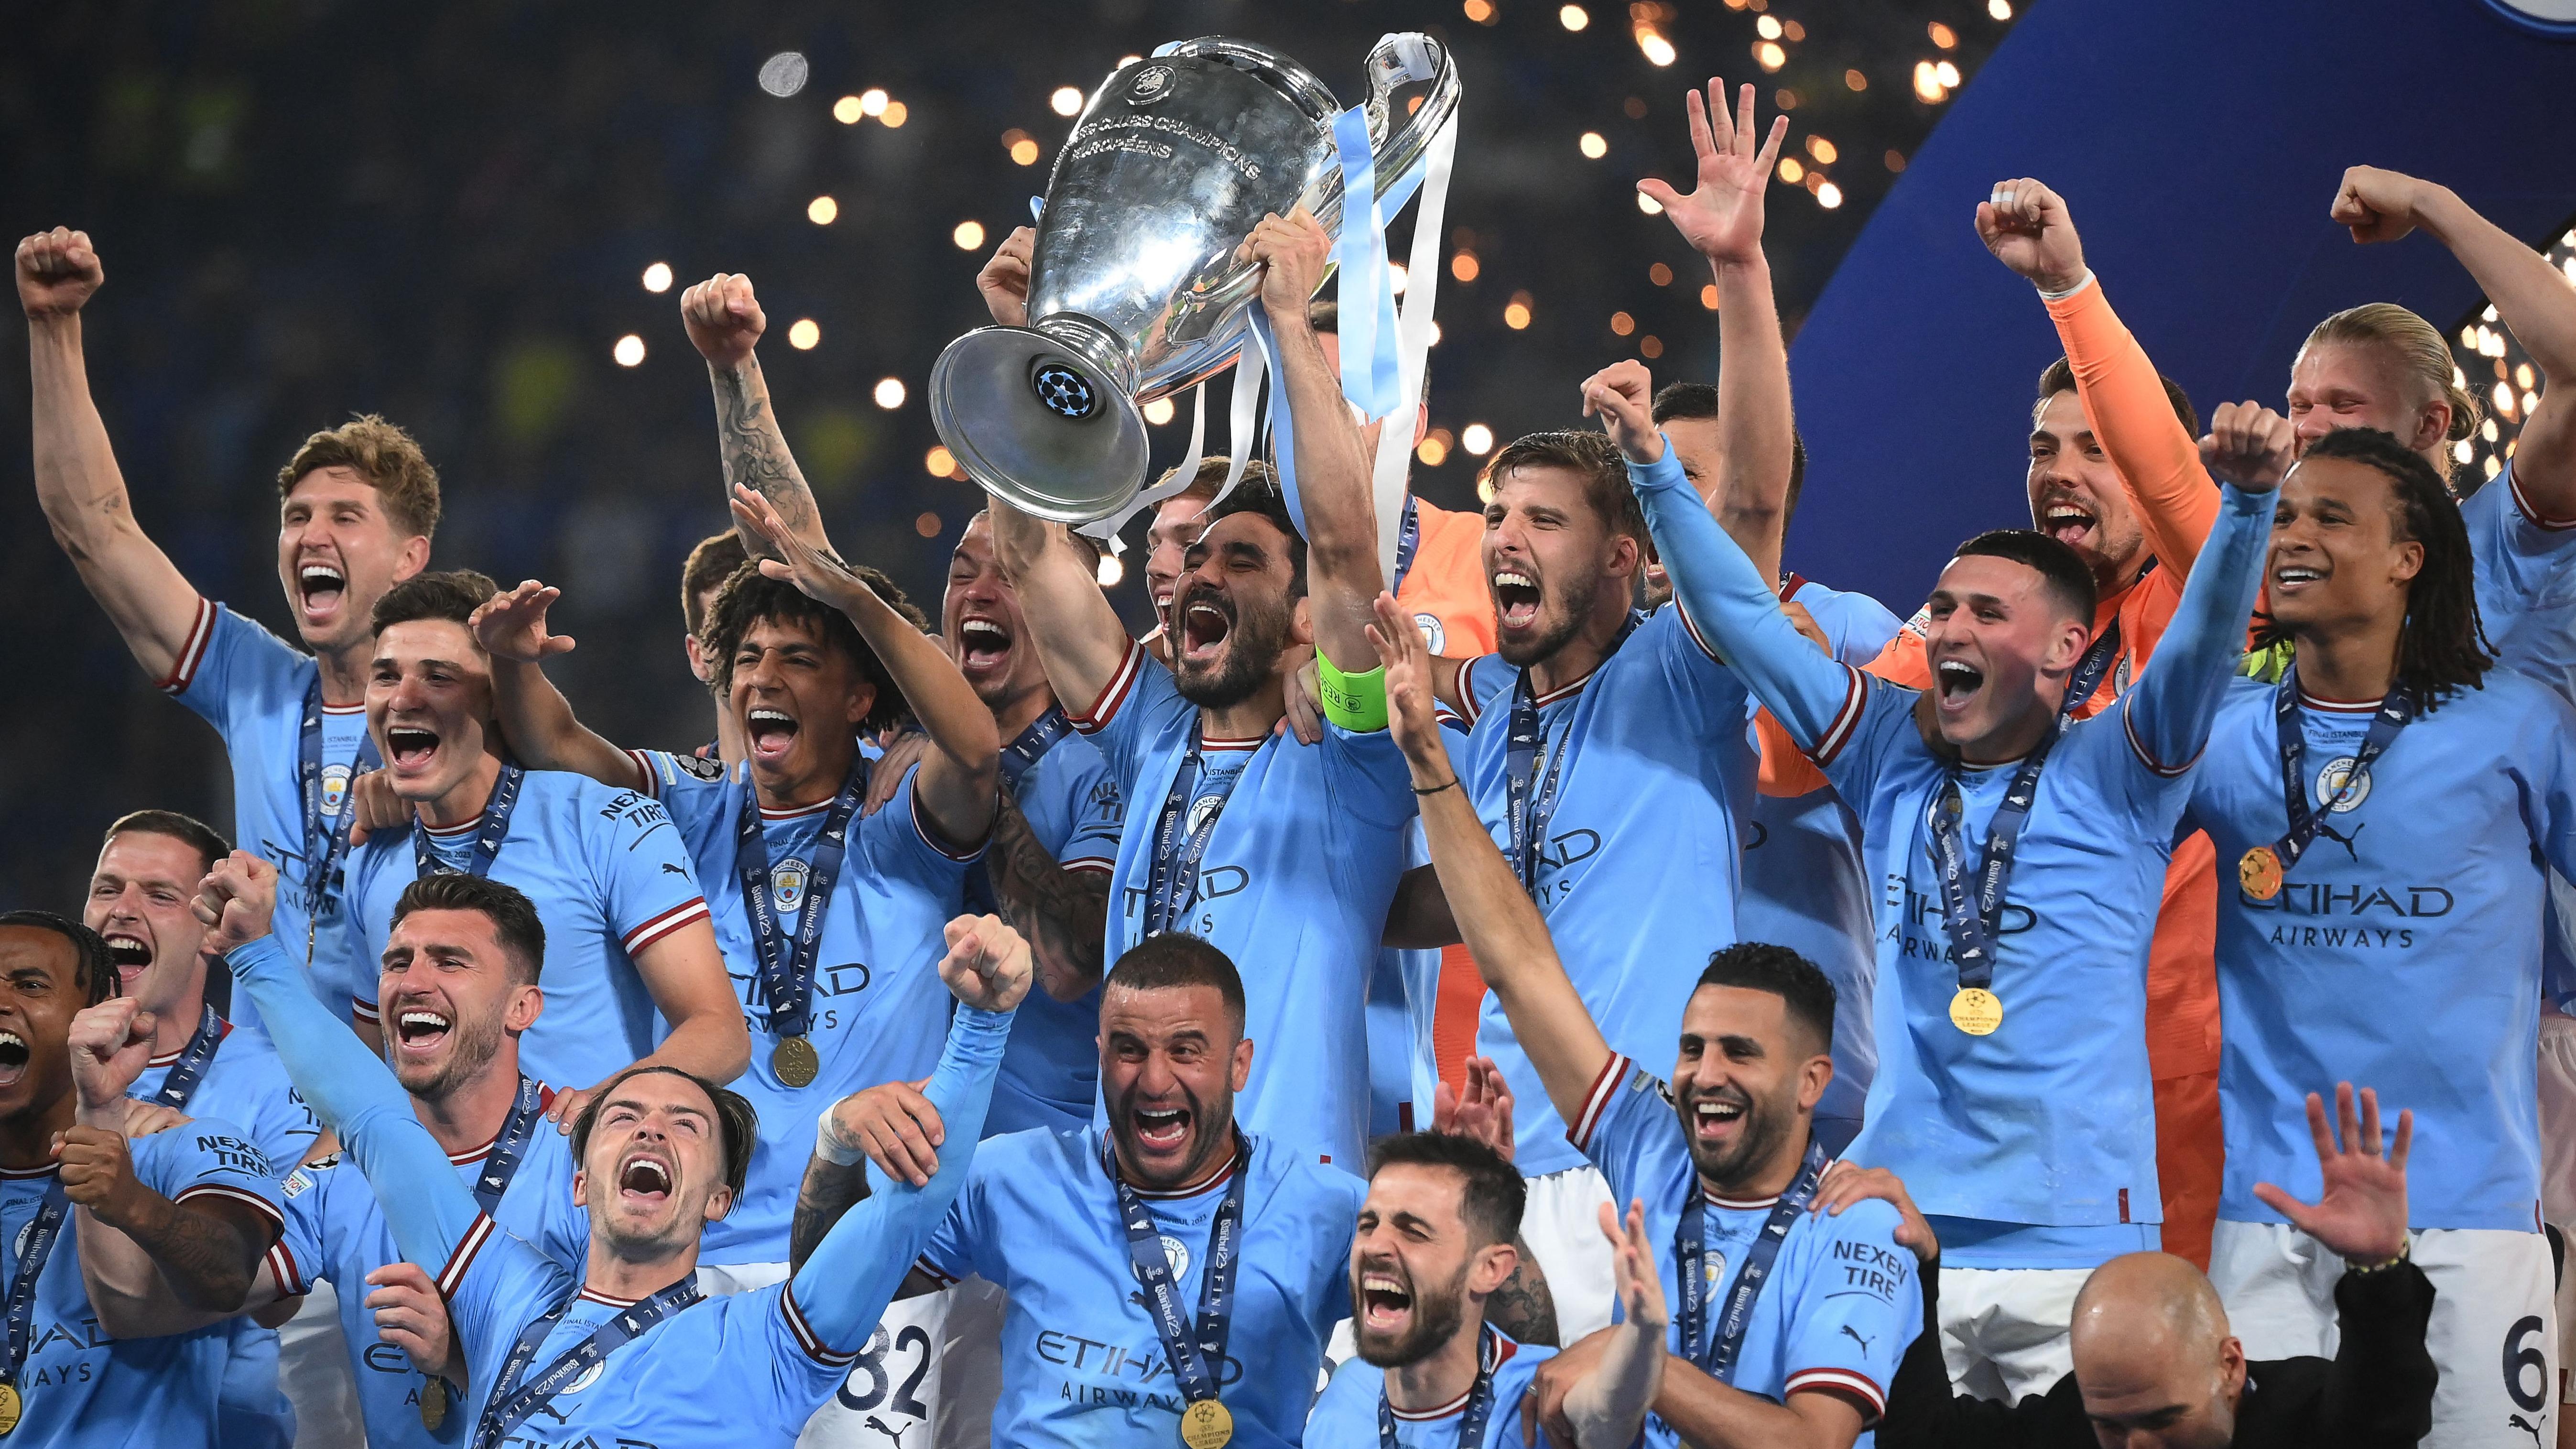 Greatest Champions League team in history? Manchester City stake their claim after clinching treble. Sporting News India